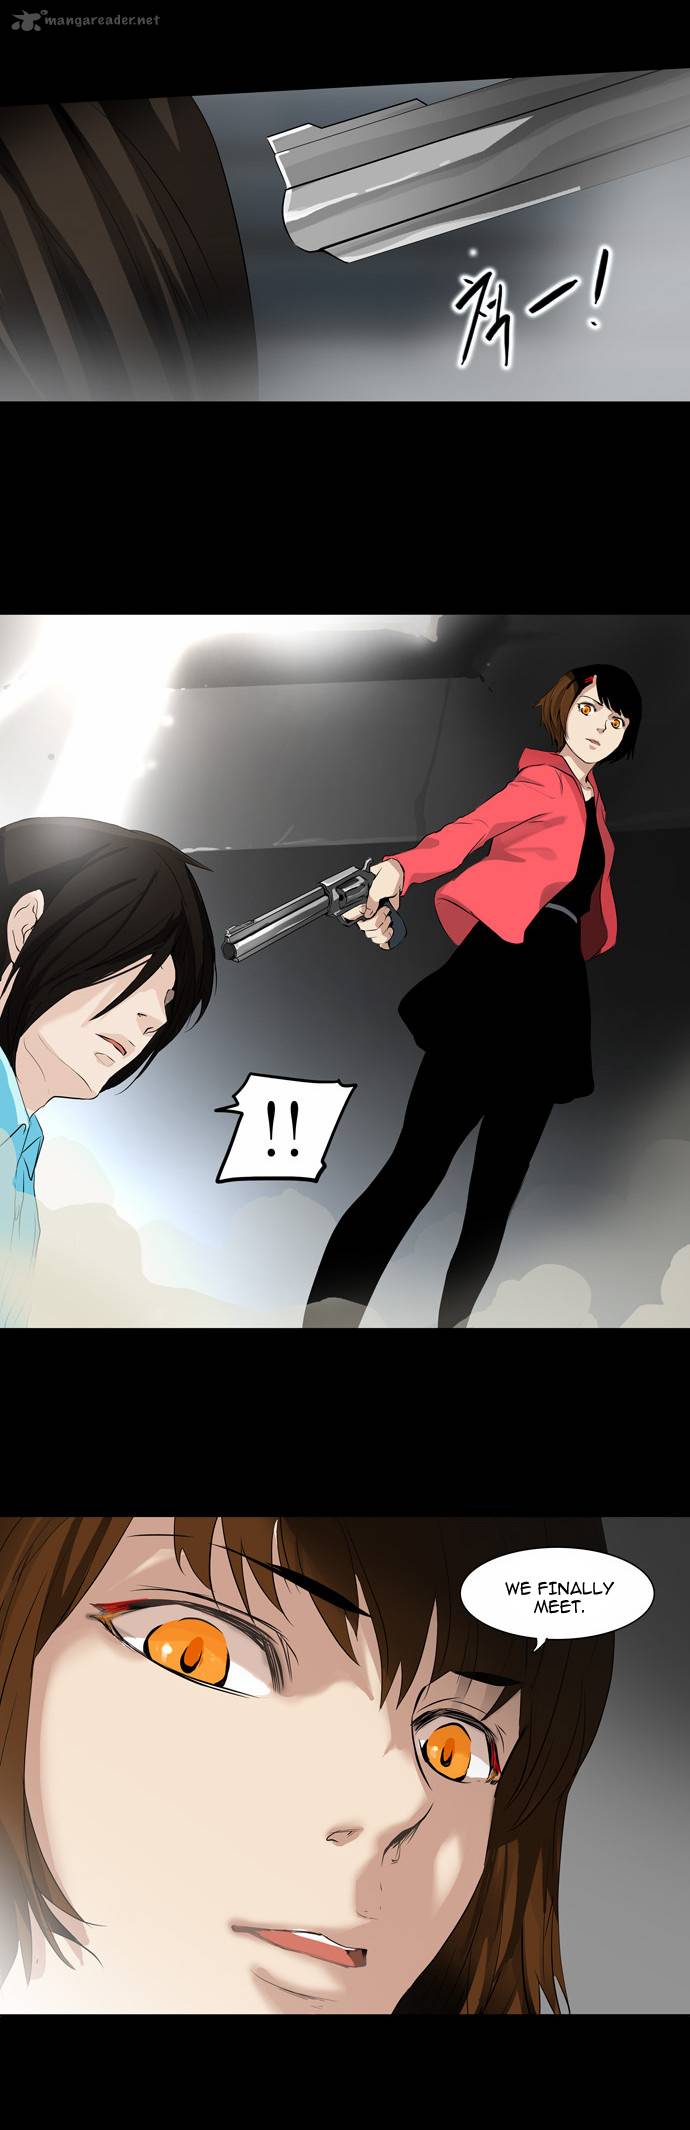 Tower Of God 139 24